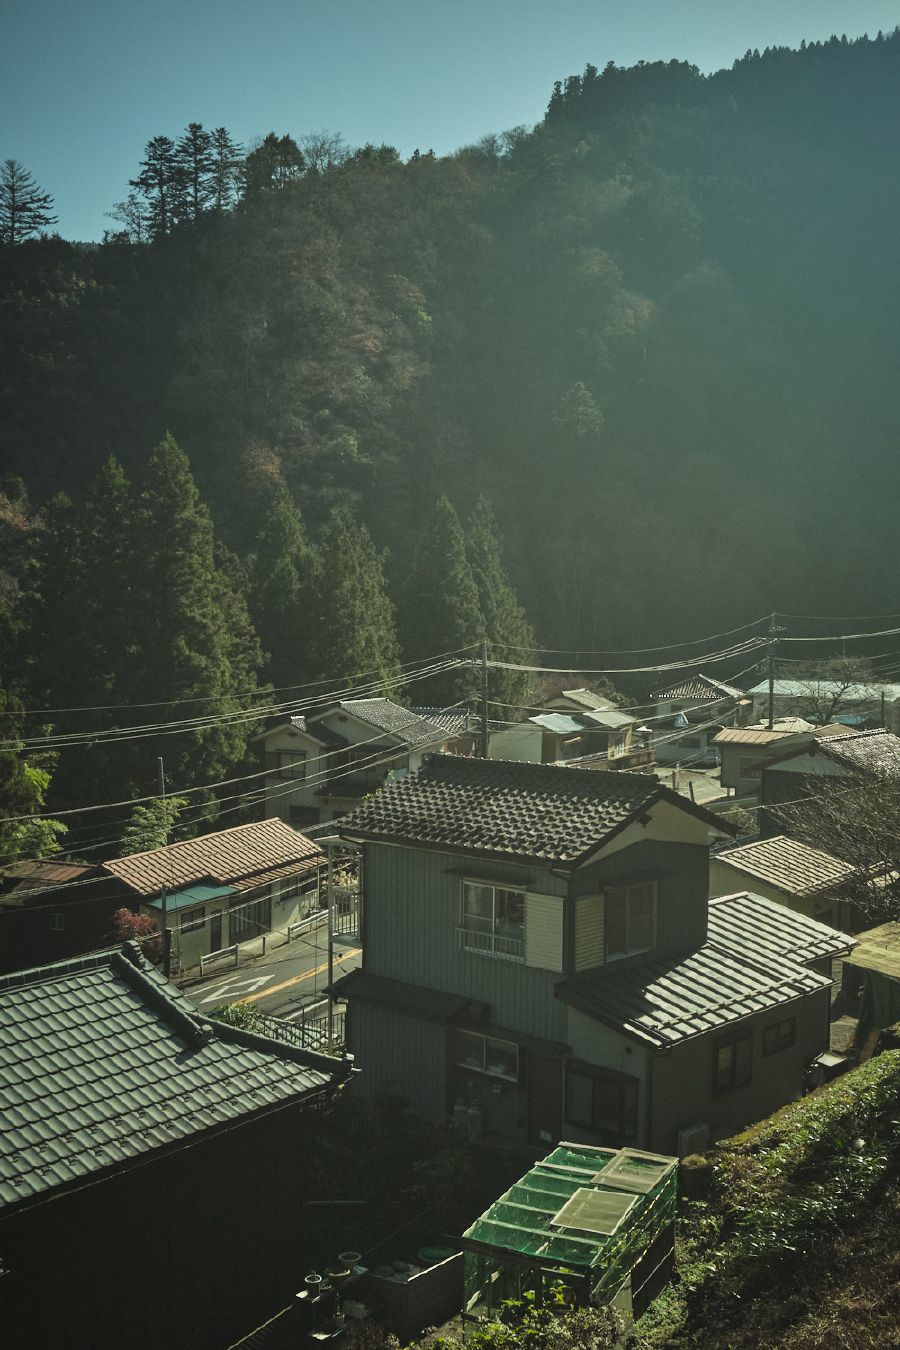 
A picture from Okutama in the western corner of Tokyo. It's a mountainous area that doesn't feel anything like the typical description of Tokyo.
